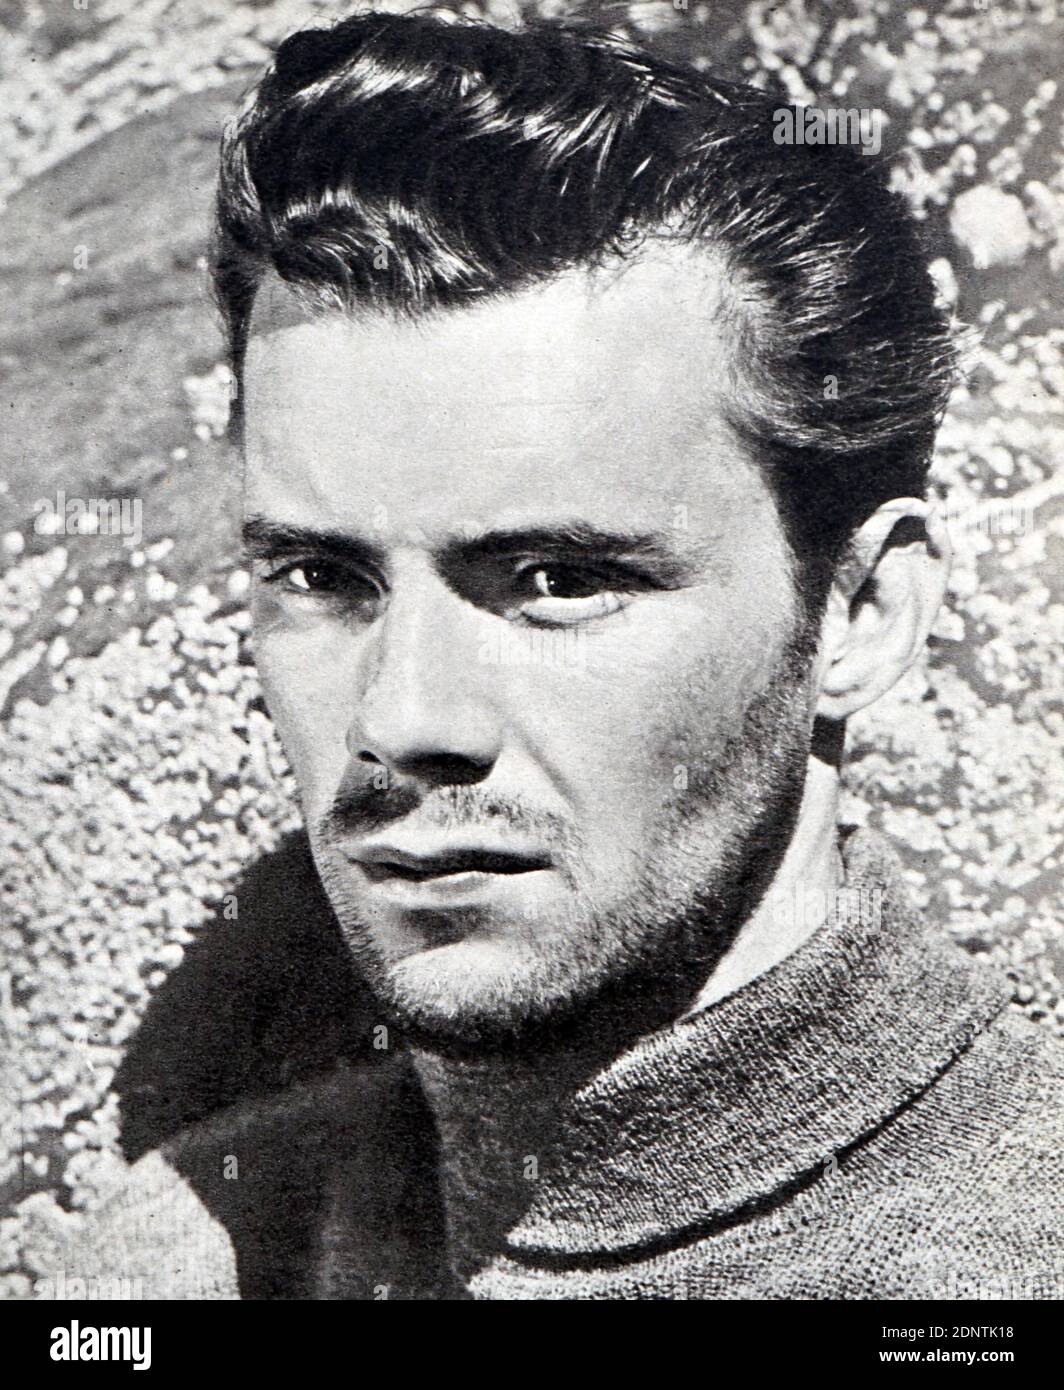 Photograph of Sir Dirk Bogarde (1921-1999) an English actor and writer. Stock Photo